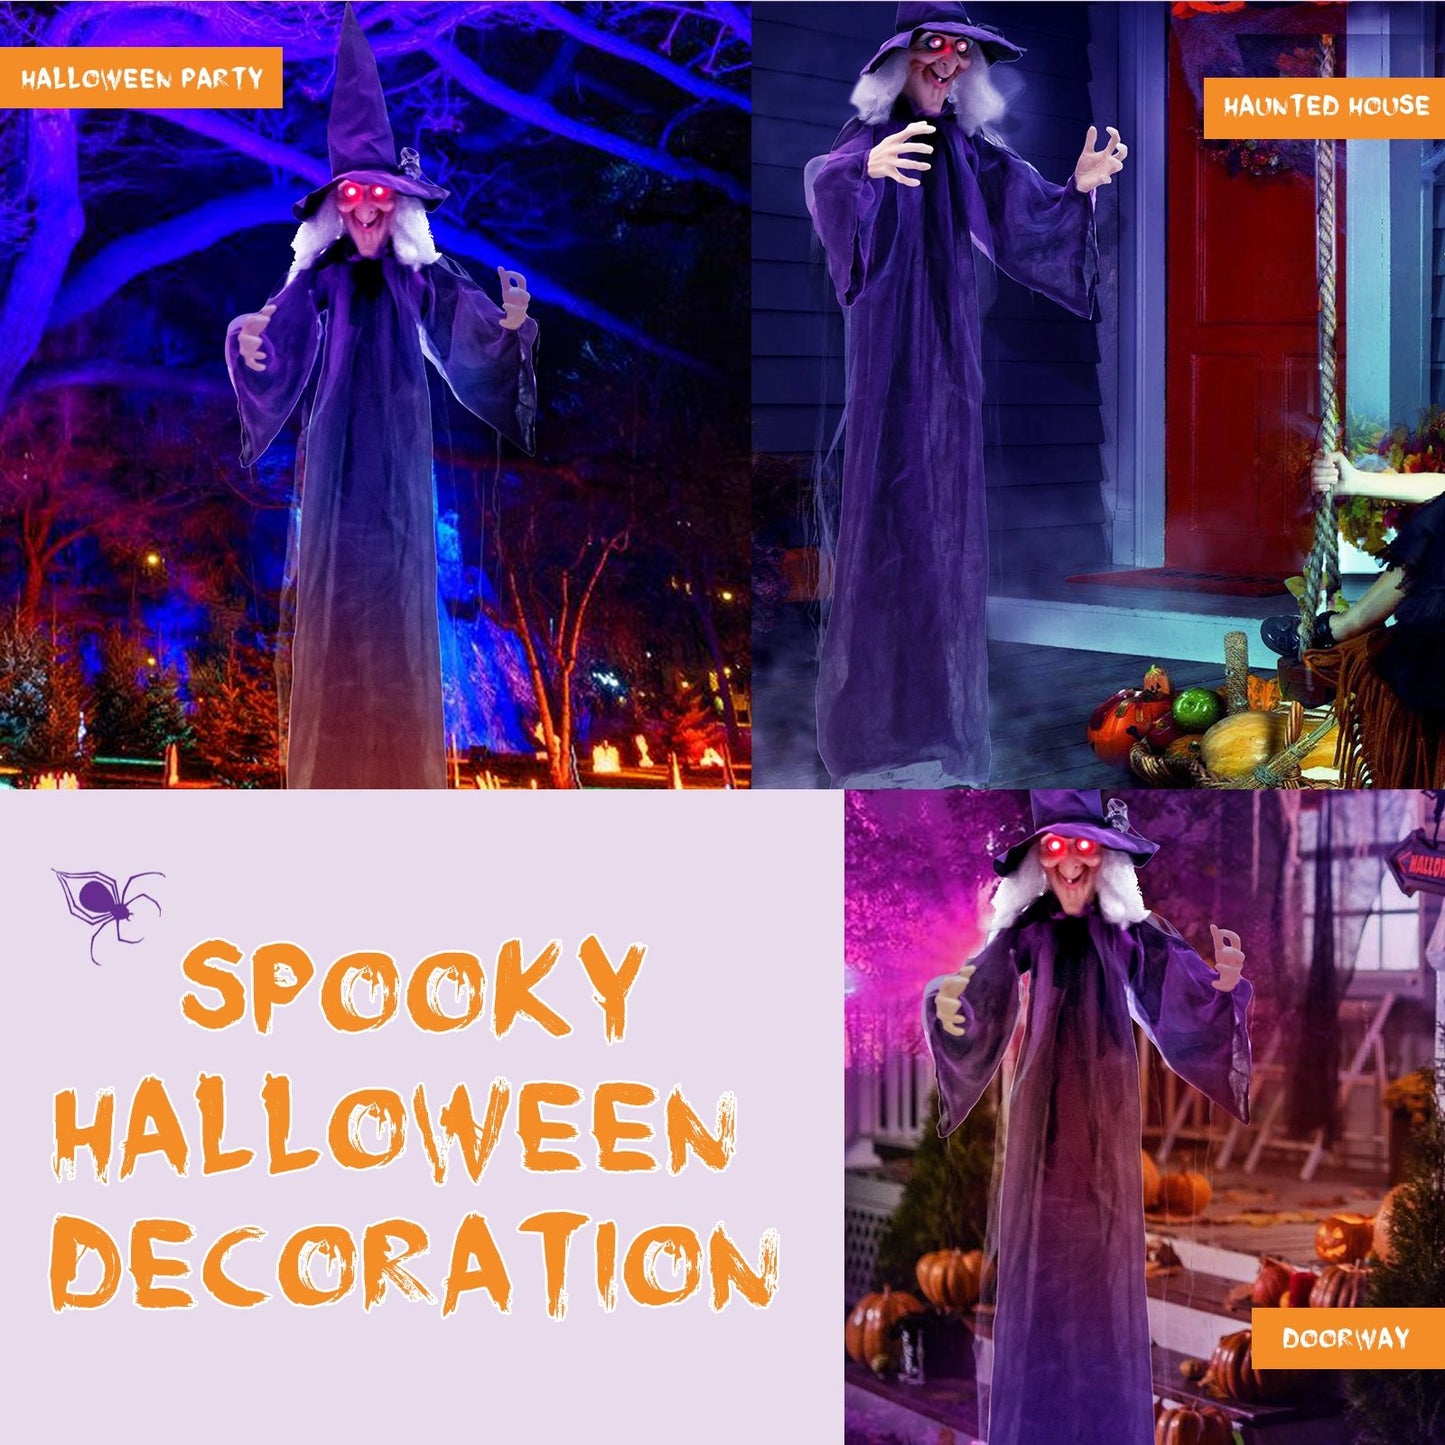 Hanging Halloween Decoration with Pre-Recorded Phrases, Purple